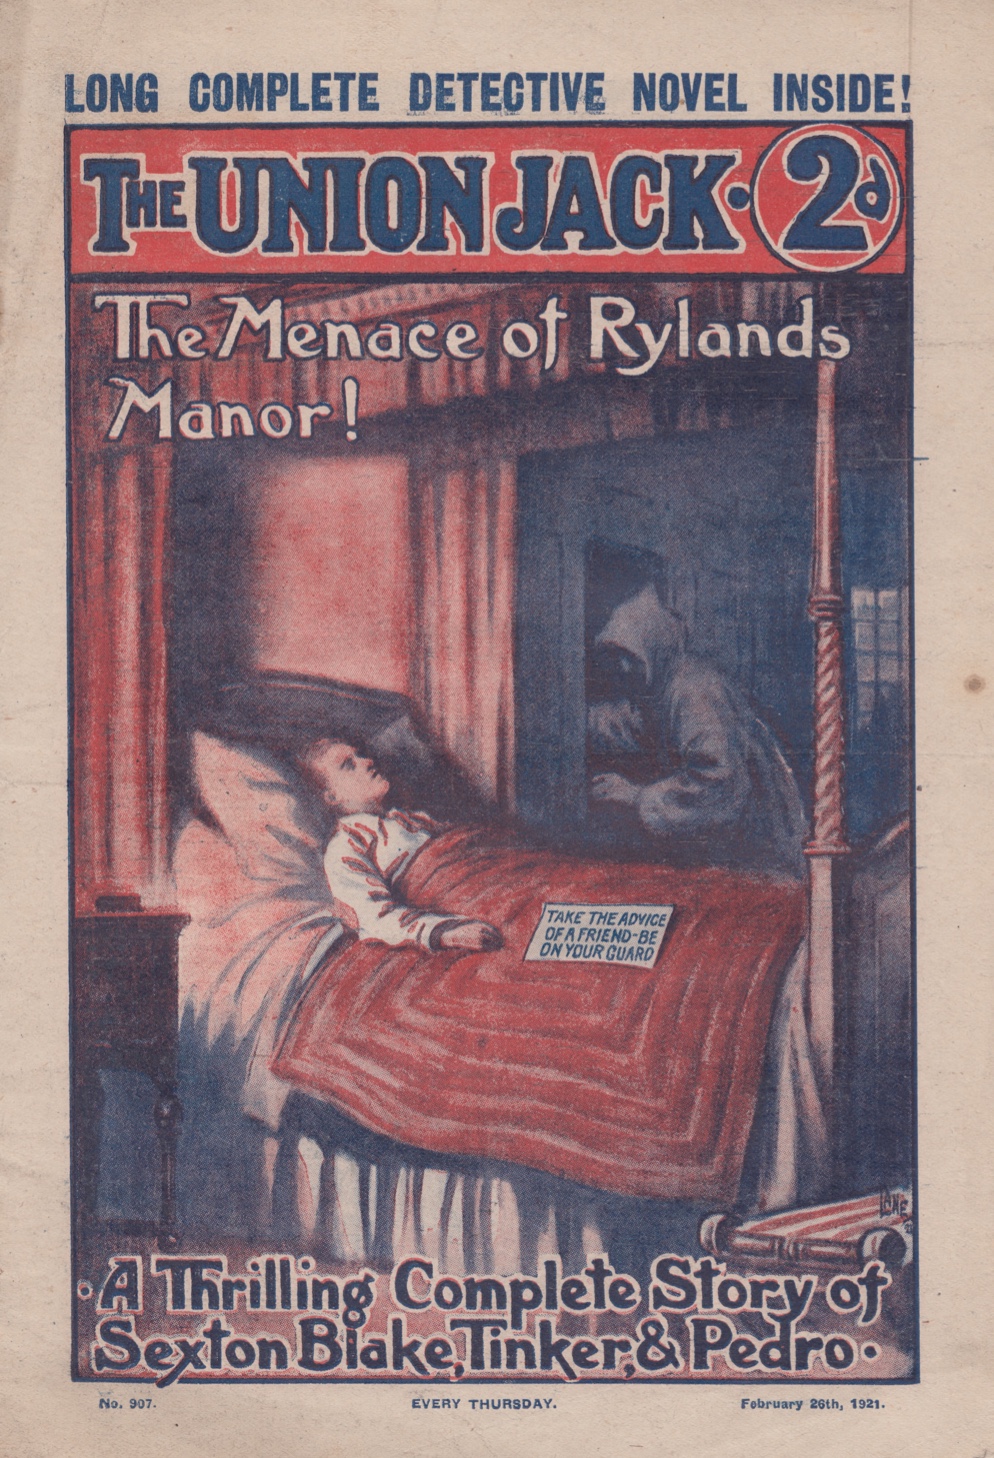 THE MENACE OF RYLANDS MANOR